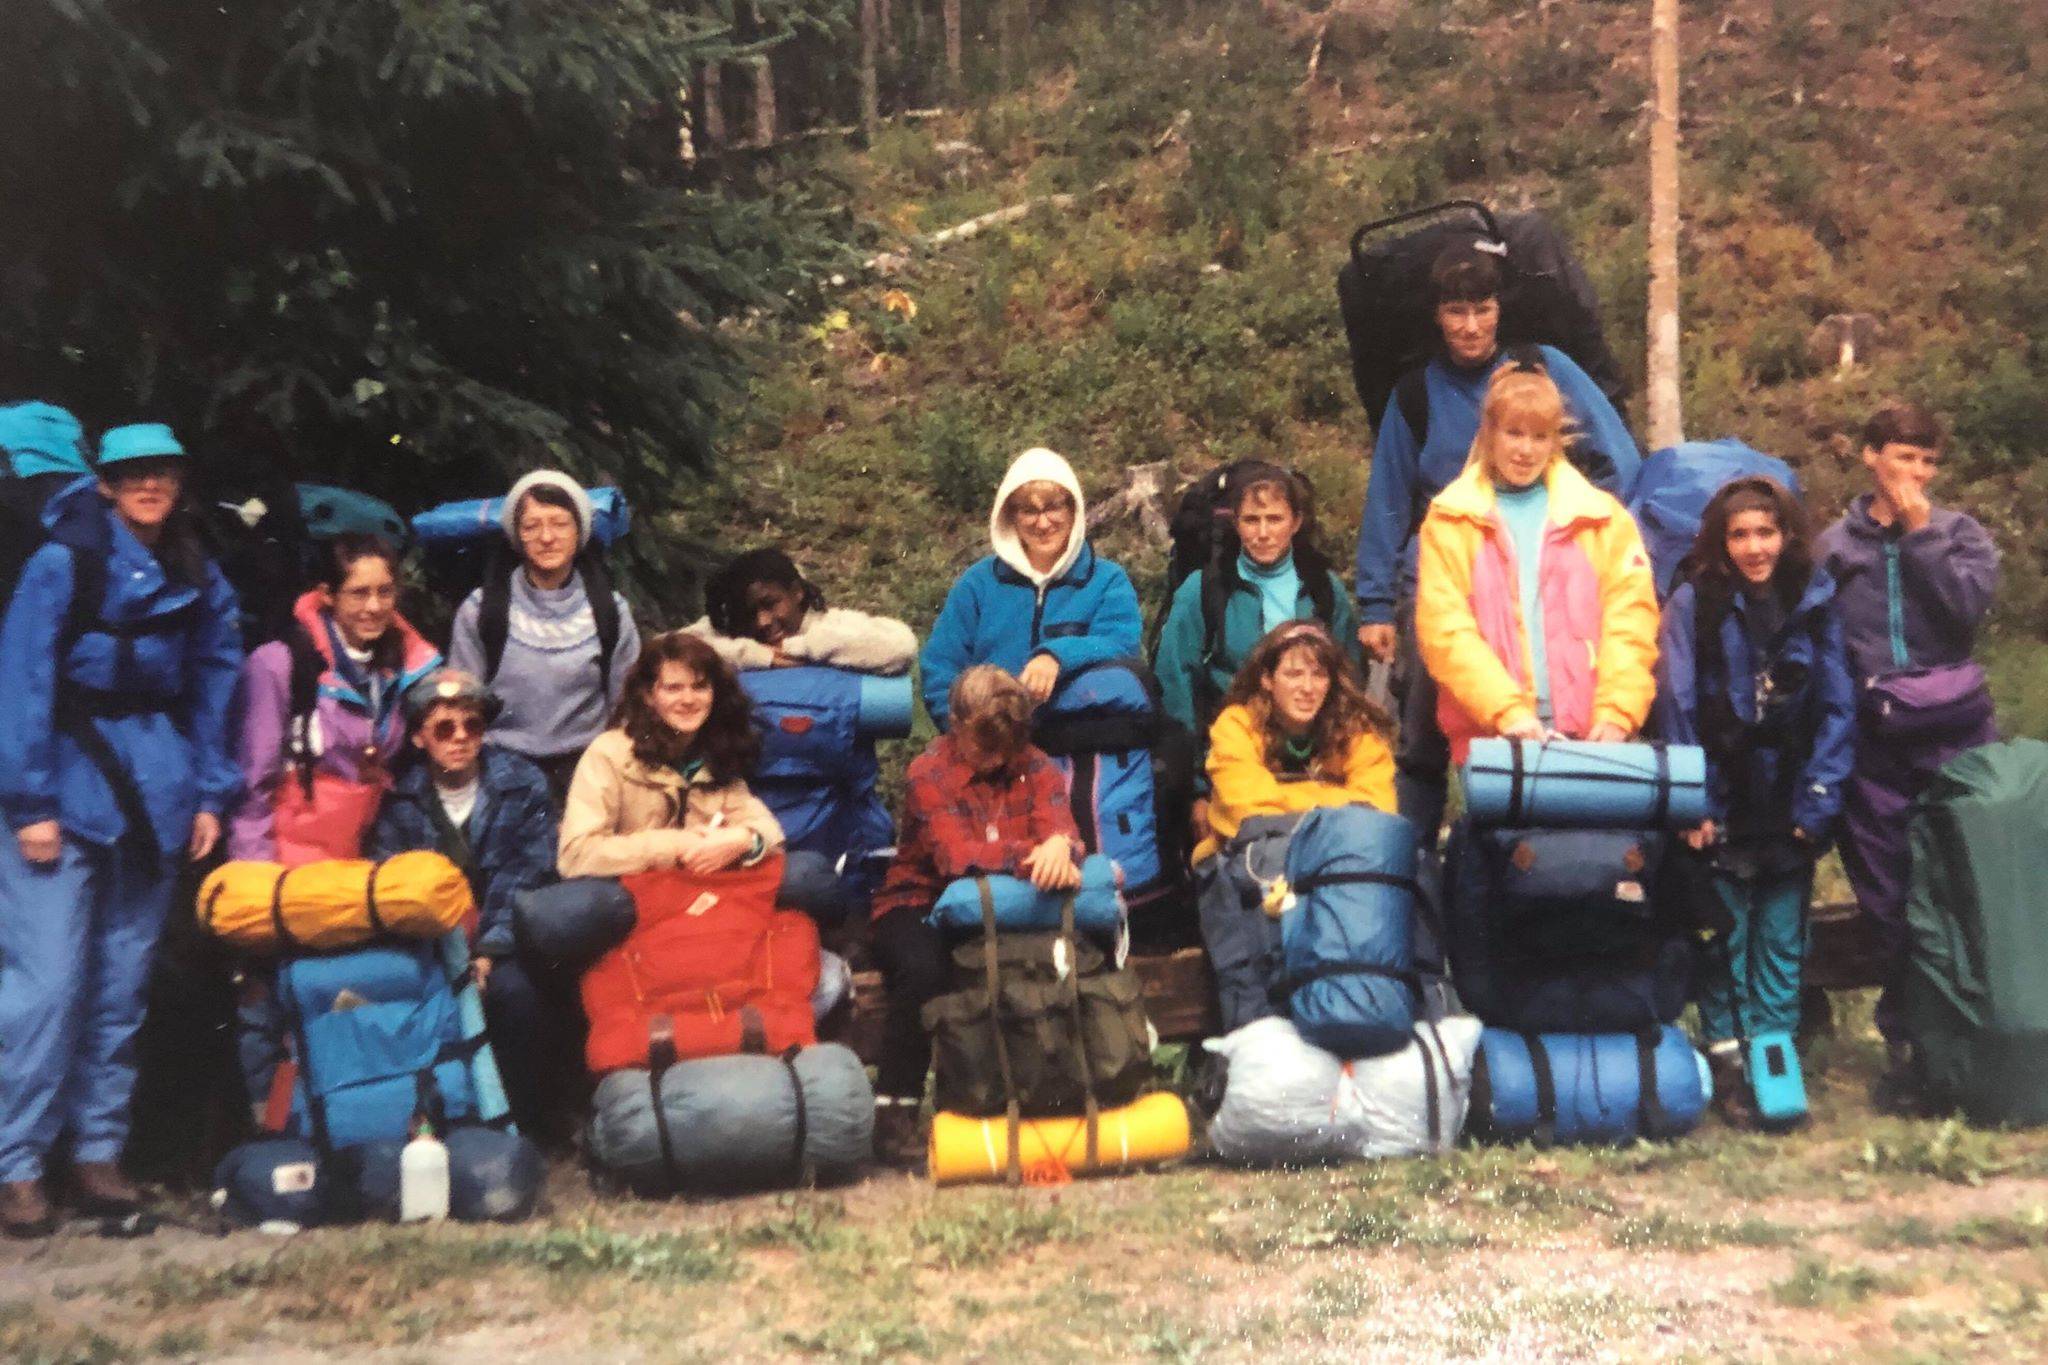 A Girl Scout troop gets ready to hike the Resurrection Trail in August of 1992. (Photo courtesy of Cindy Littell)